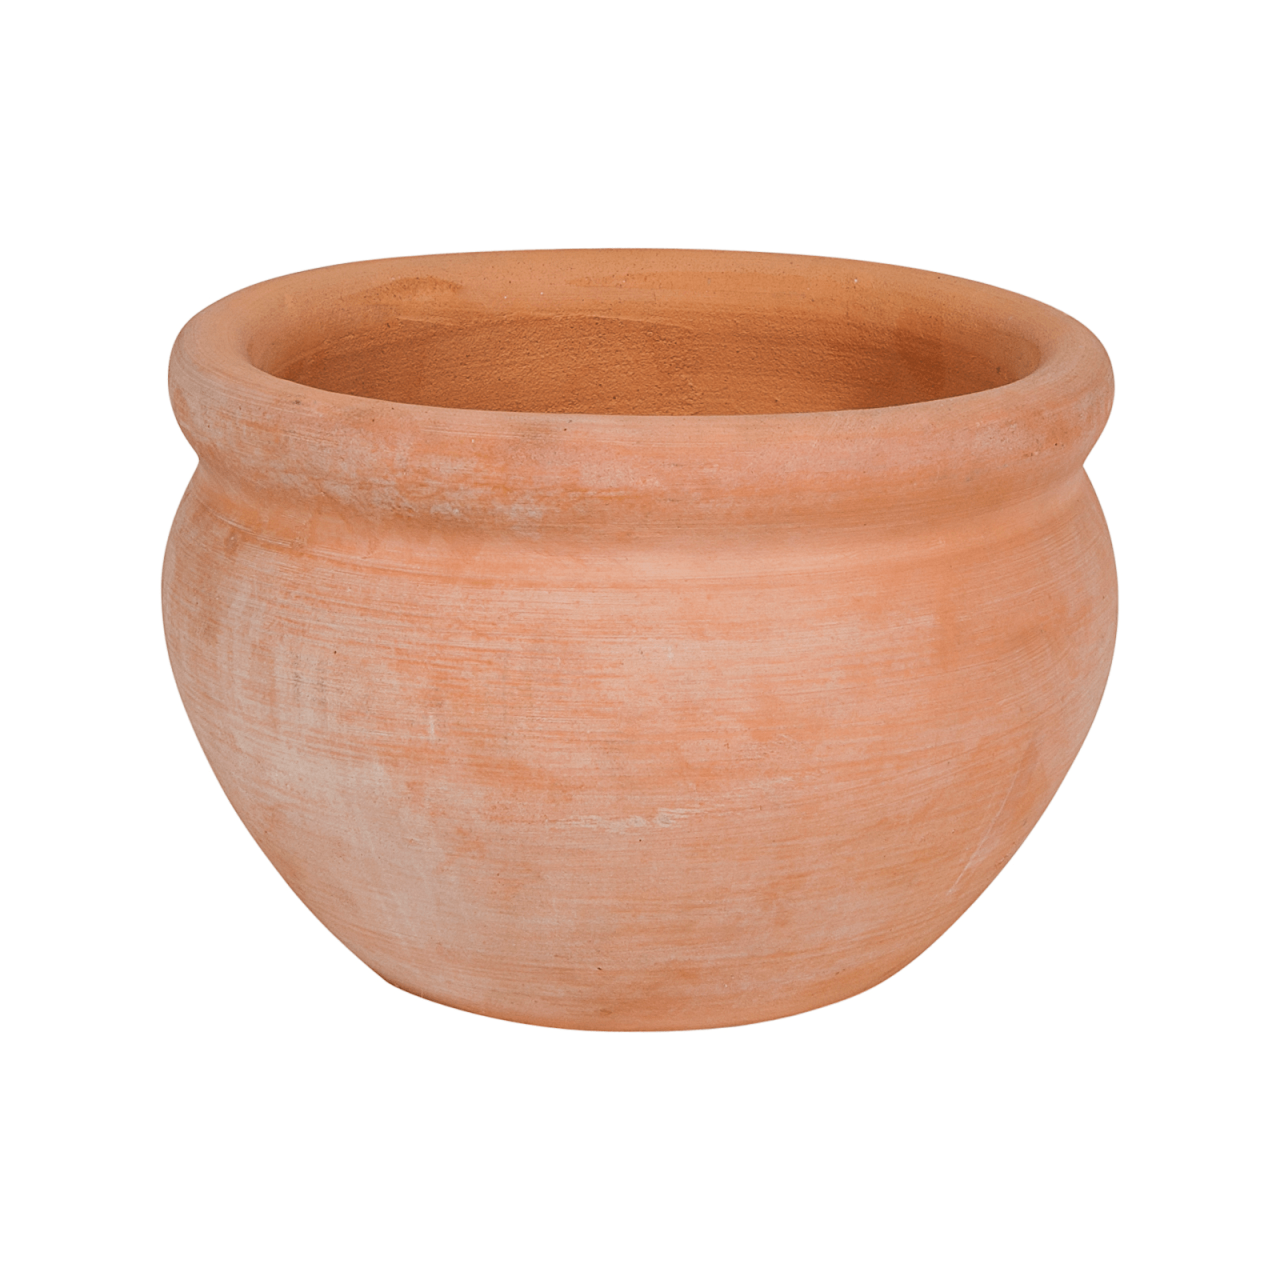 Hanging Plants Indoor | Bunnings Large Terracotta Pots: Timeless Charm for Your Outdoor Spaces